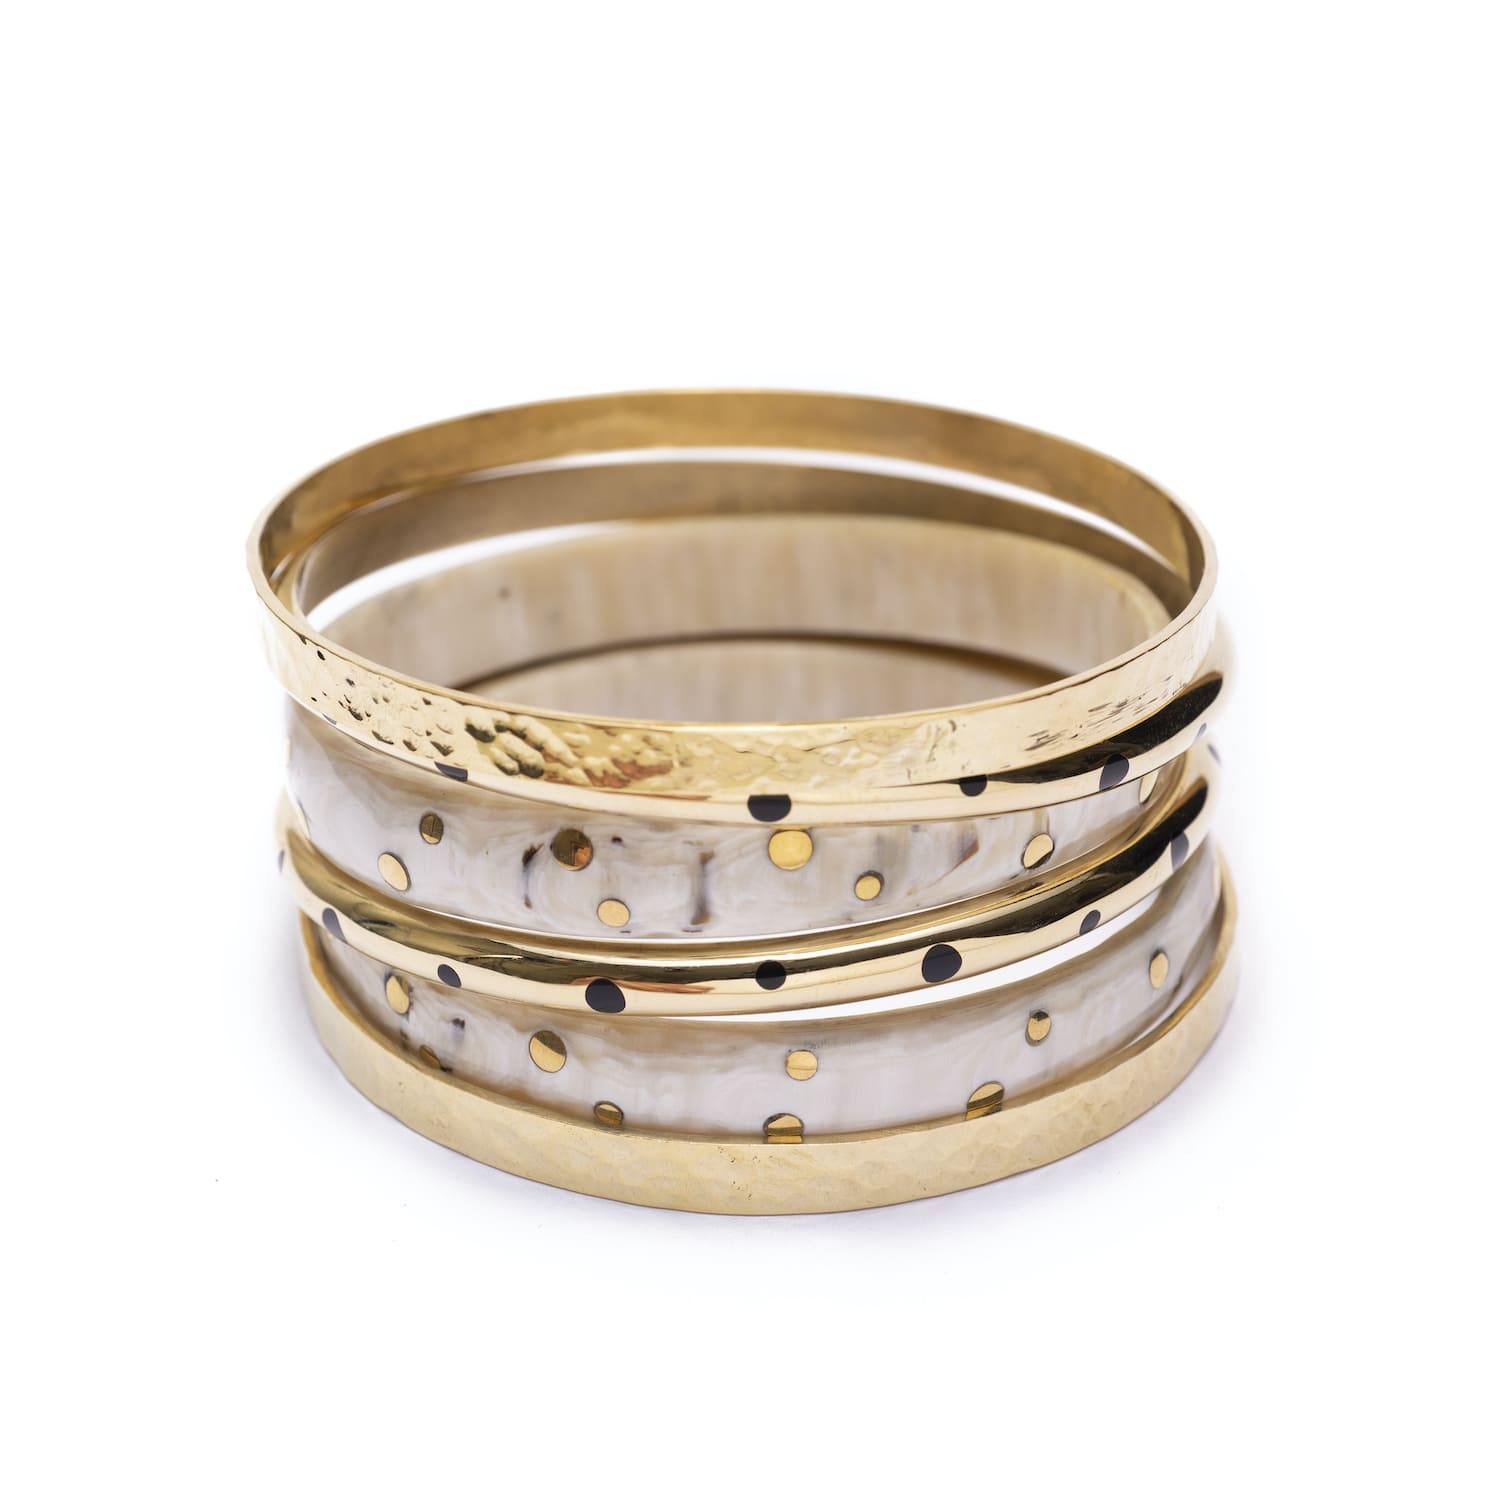 Stack of gold and white bracelets handmade from brass for women